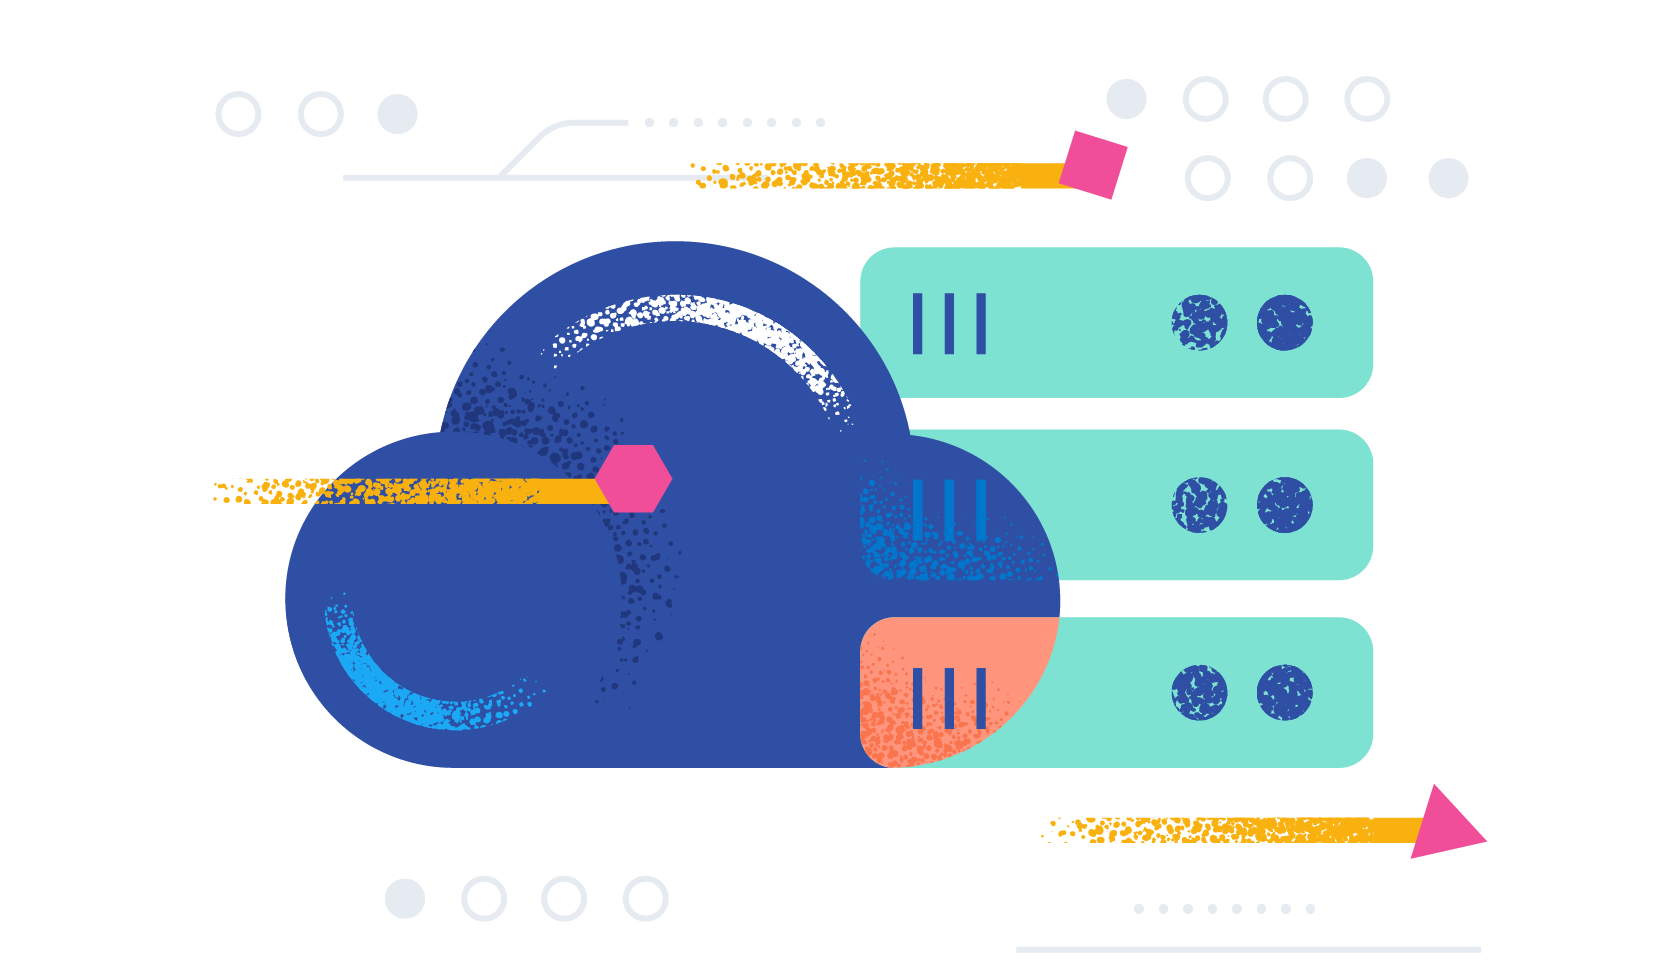 Search and replicate data between your Elastic Cloud and on-prem deployments